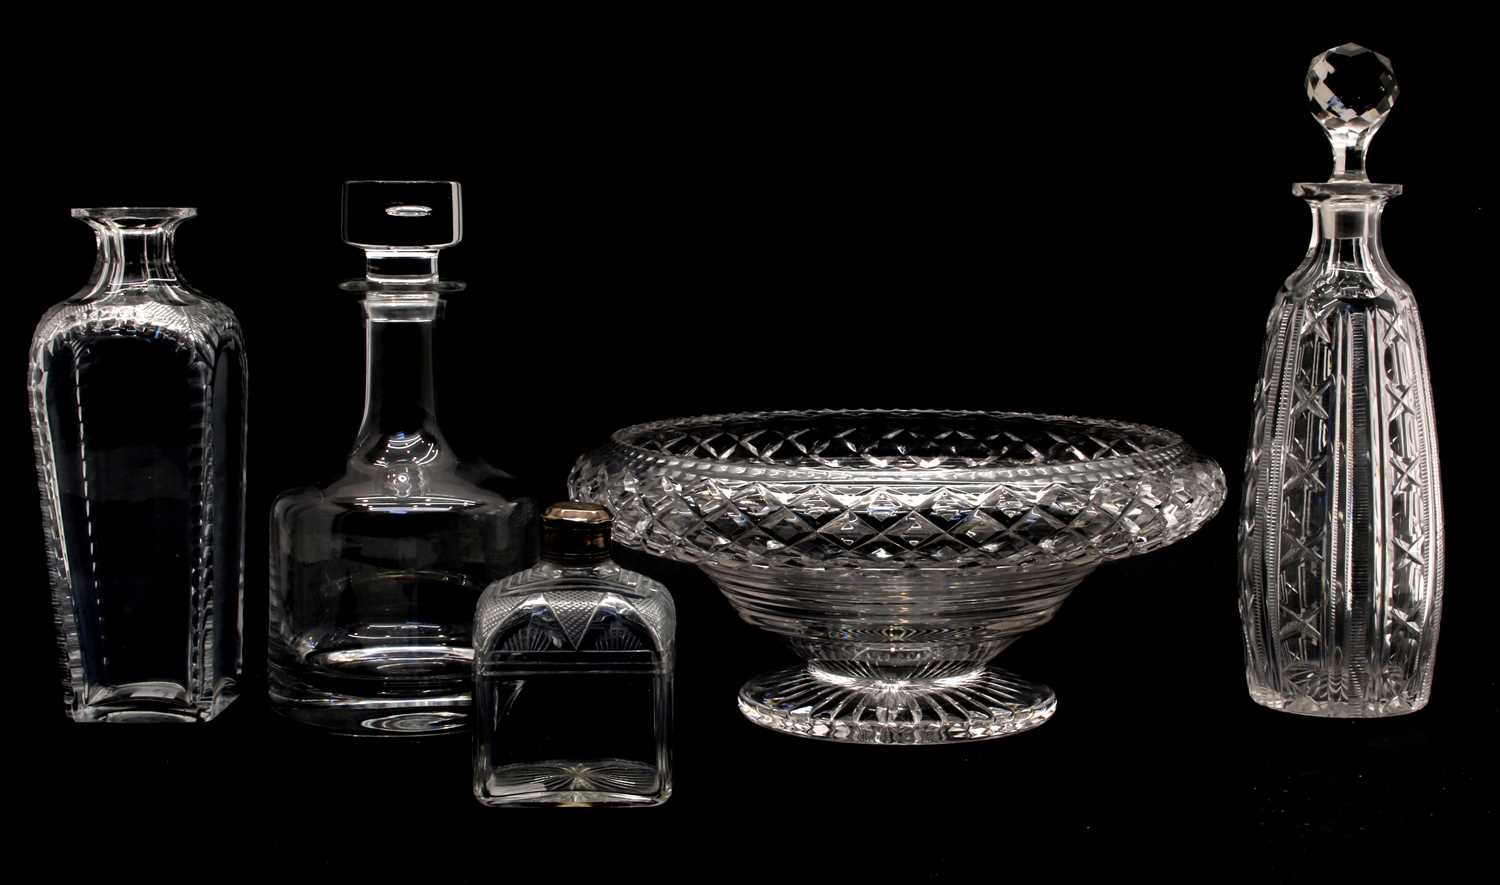 Lot 114 - A pair of early 19th century Anglo-Irish spirit flasks with crest engraved silver lids